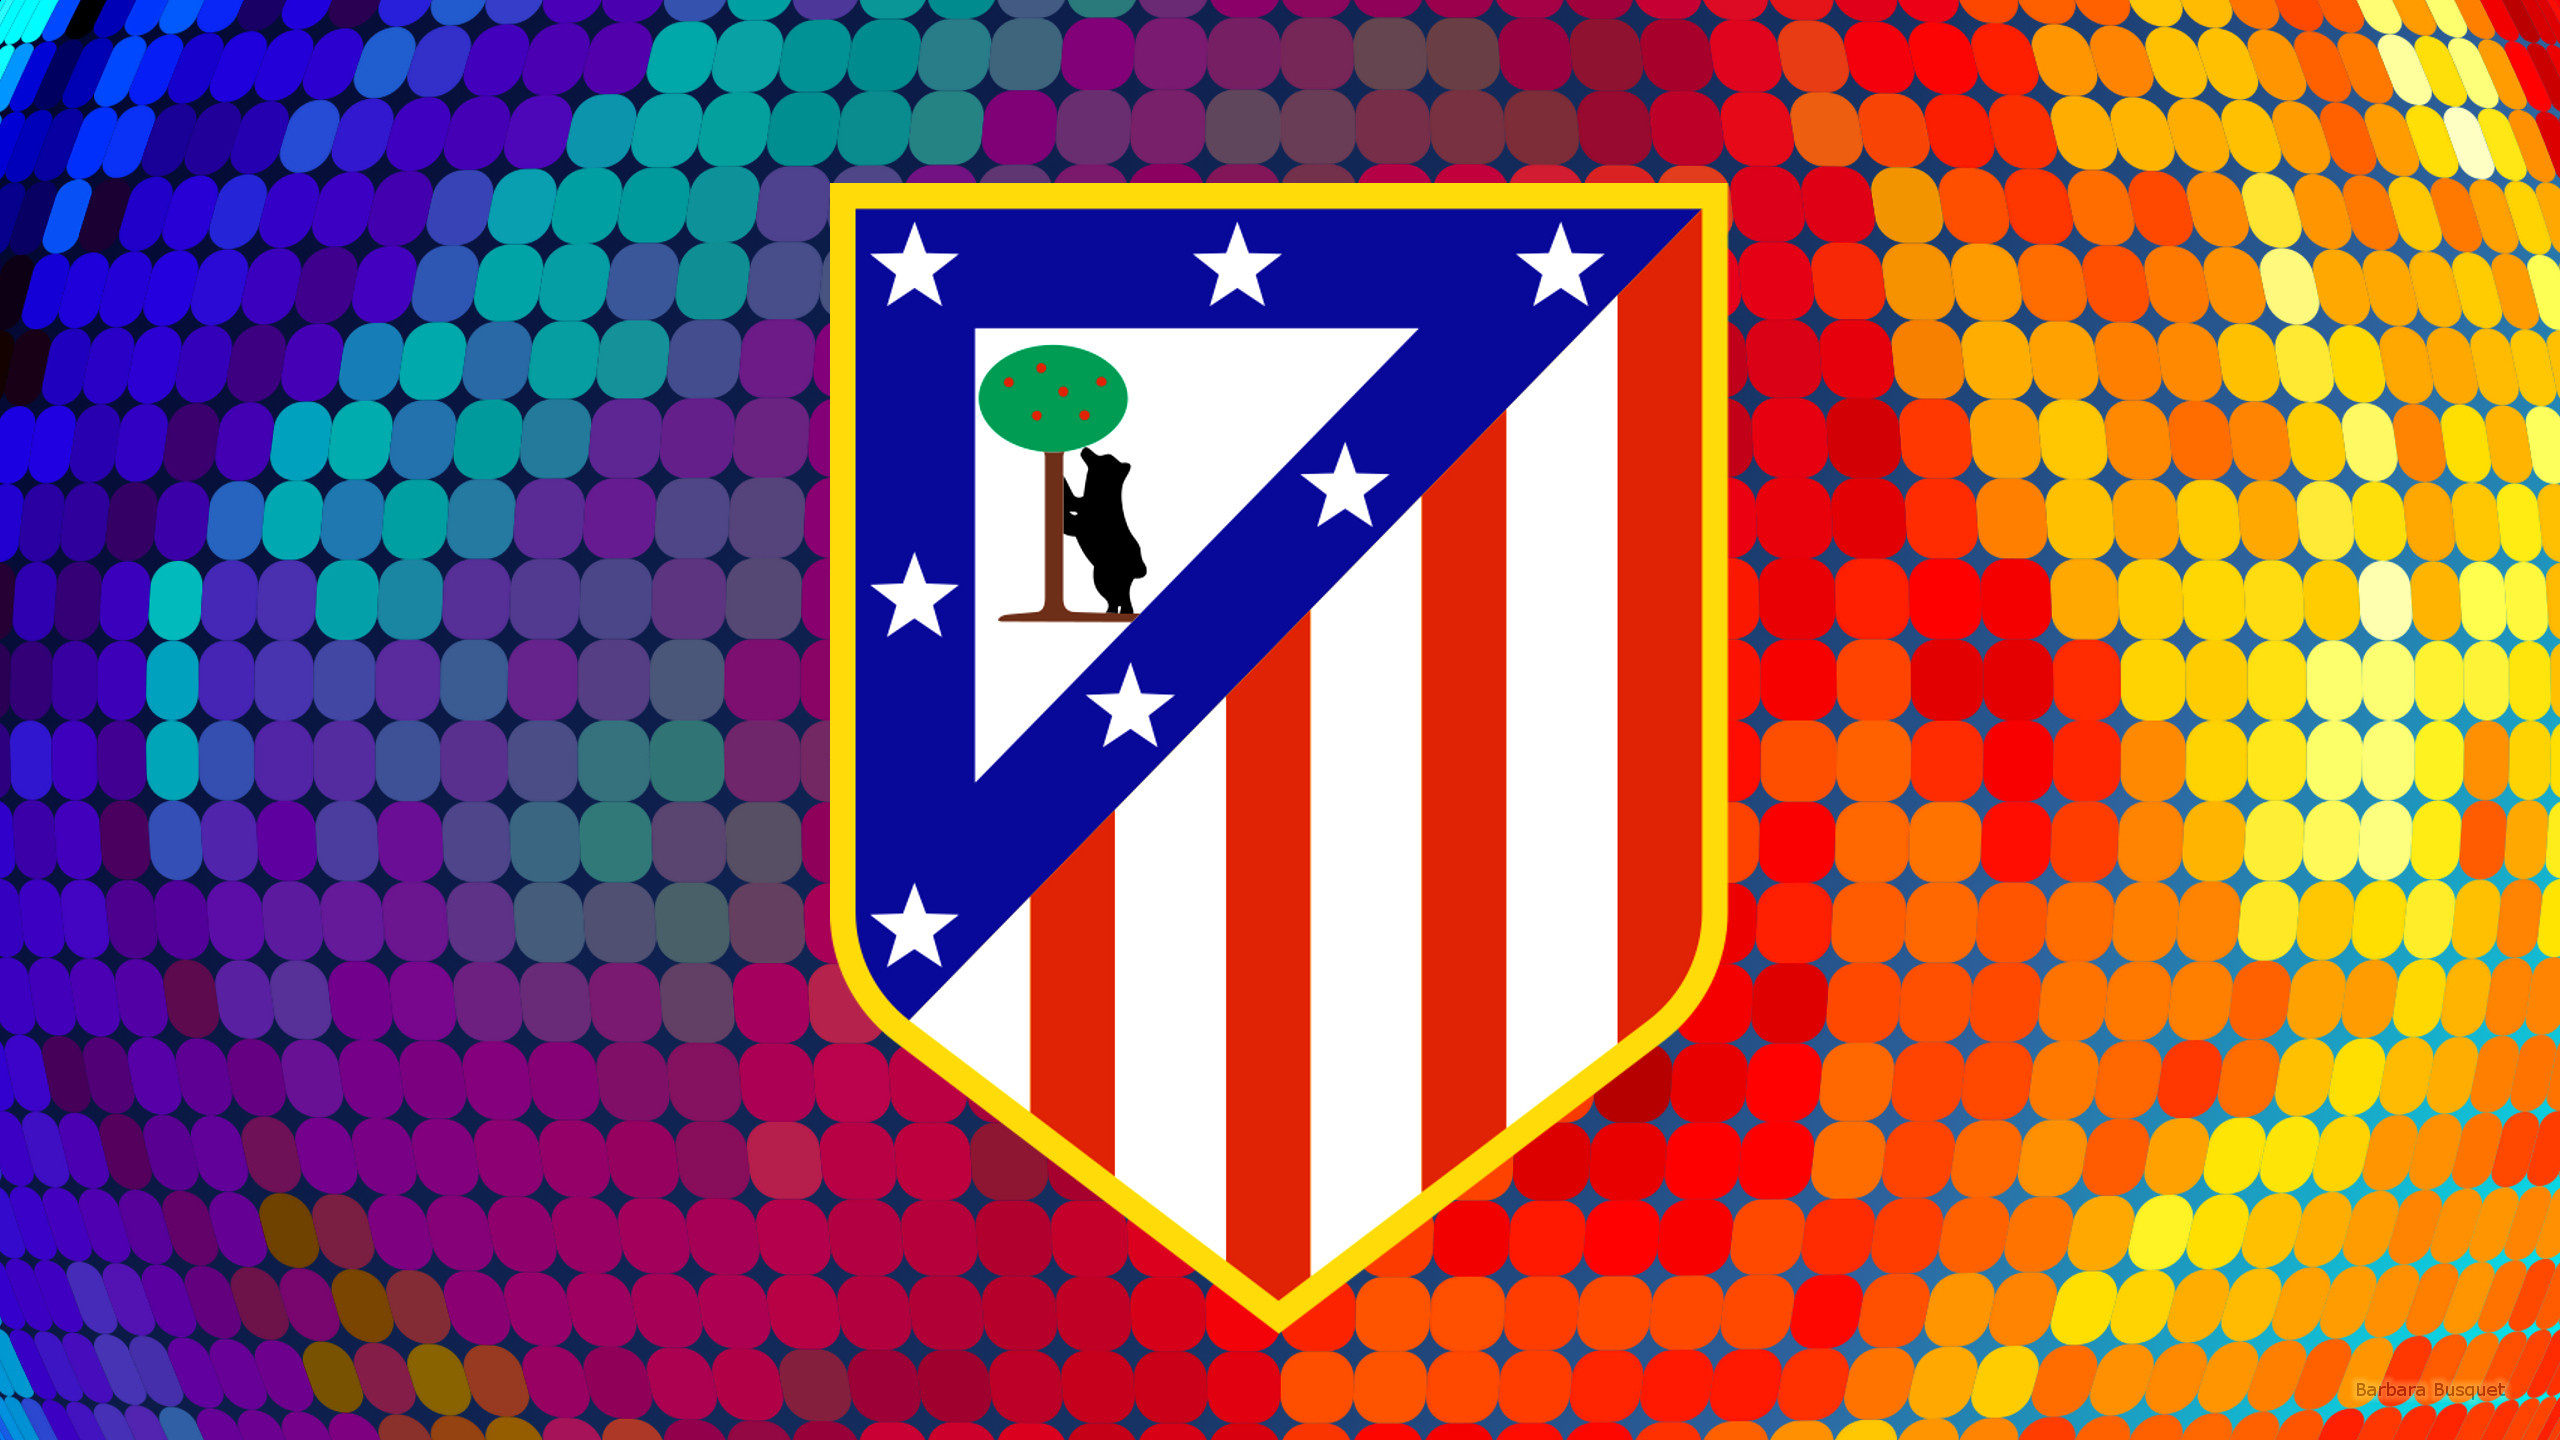 Atletico Madrid: The club has won a league and cup double in 1996. 2560x1440 HD Wallpaper.